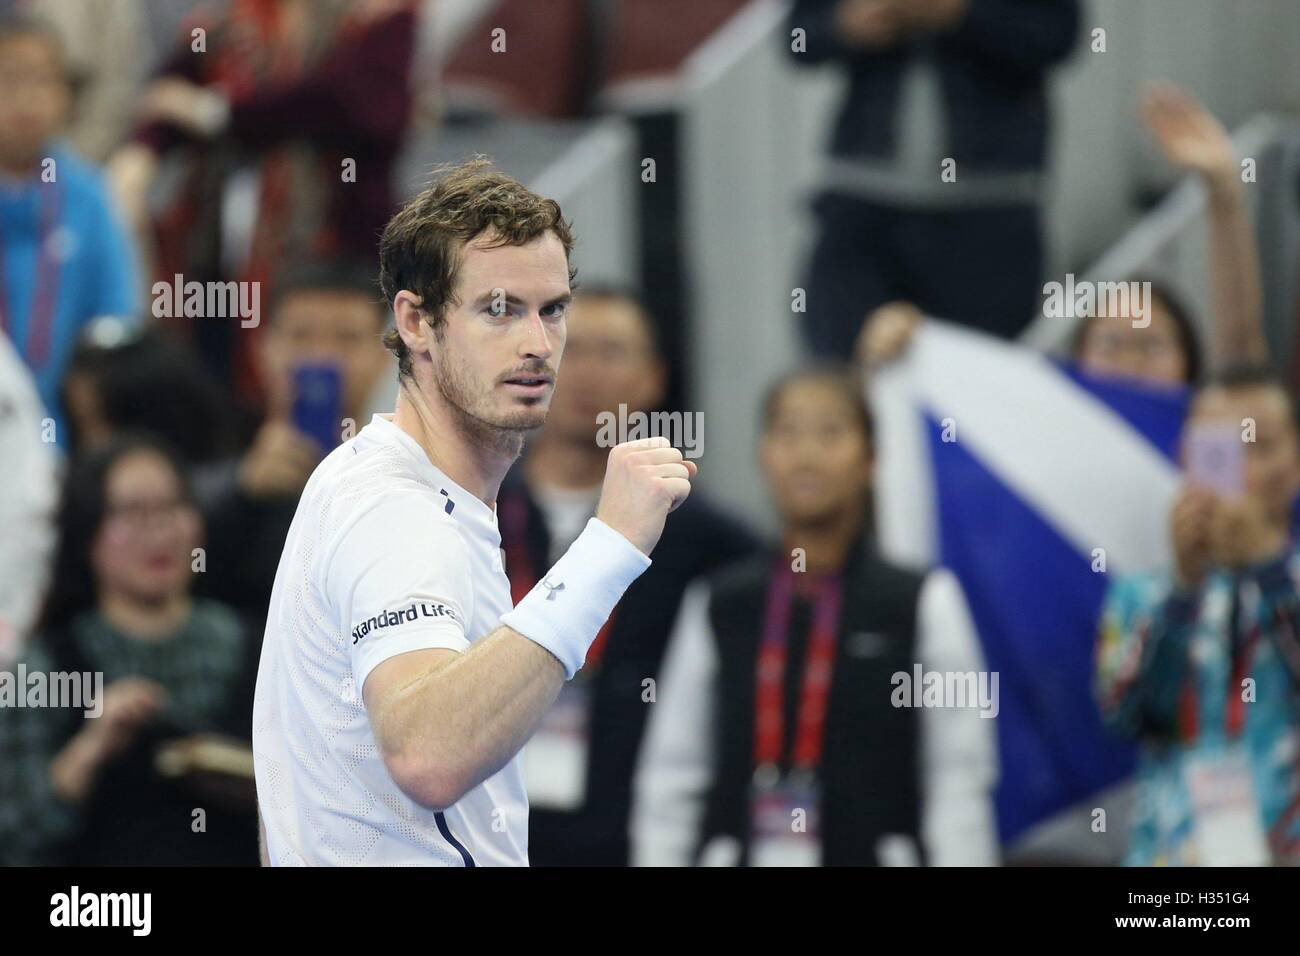 Beijing, China. 4th Oct, 2016. Great Britain's Andy Murray celebrates his victory in the men's singles first round match against Italy's Andreas Seppi at the China Open tennis tournament in Beijing, capital of China, Oct. 4, 2016. Credit:  Xing Guangli/Xinhua/Alamy Live News Stock Photo